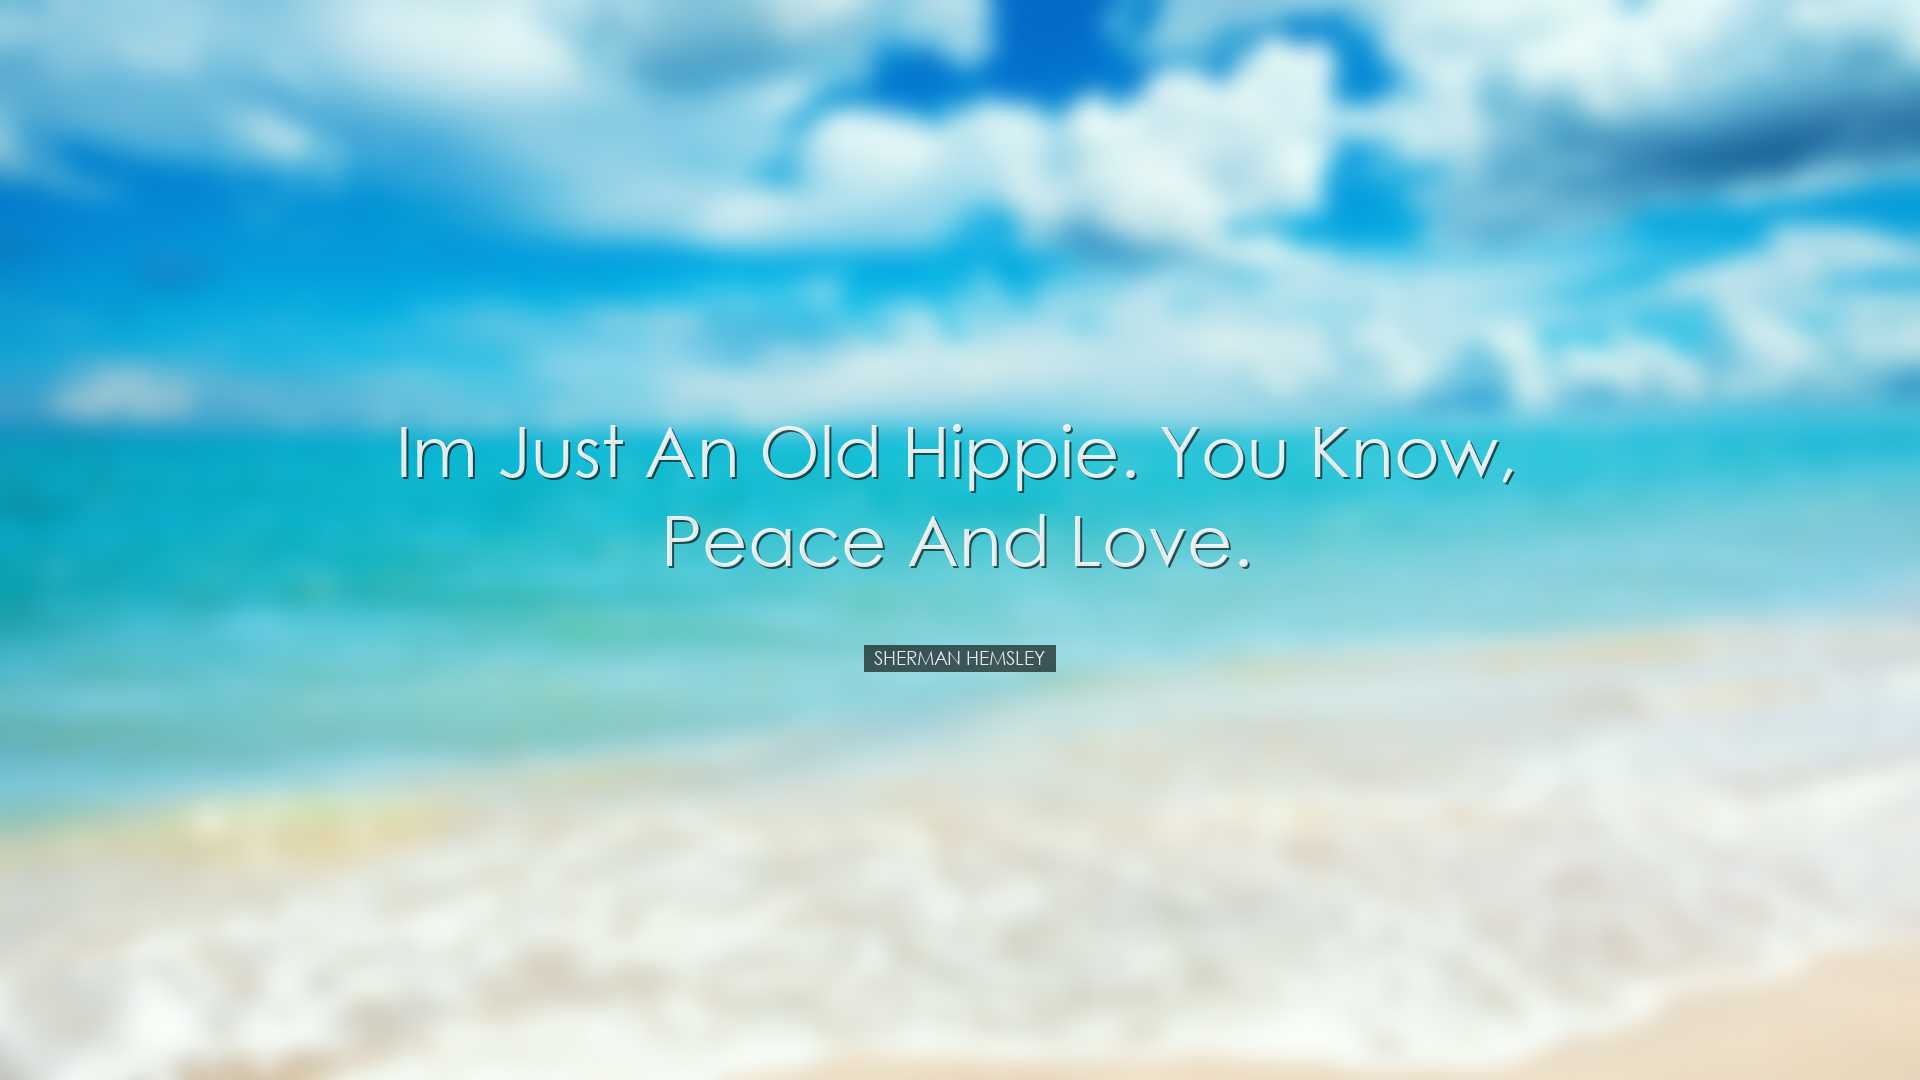 Im just an old hippie. You know, peace and love. - Sherman Hemsley